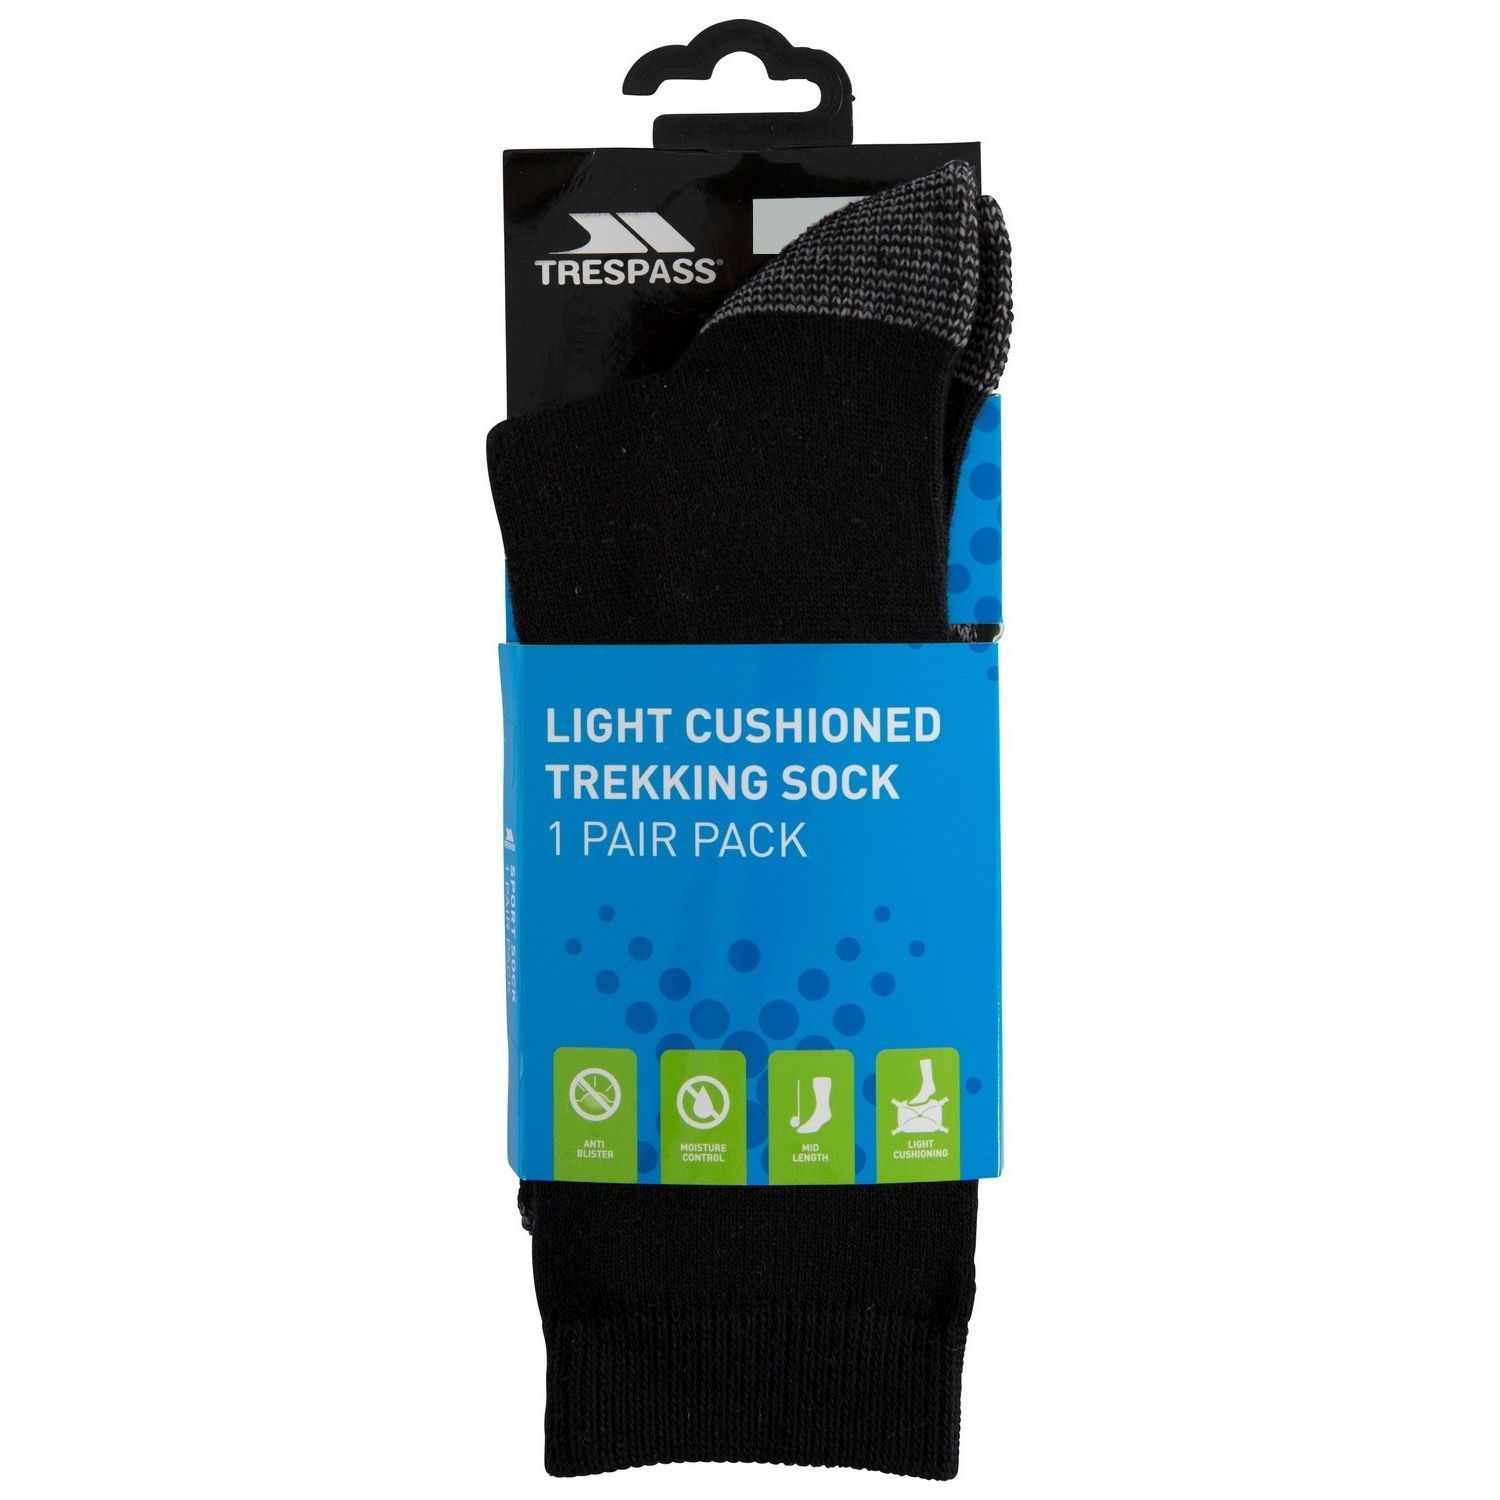 Material: 78% acrylic, 21% polyester, 1% elastane. Light cushioned sports sock. Mid-length. Extra thick cushioning. Breathable. Moisture control.